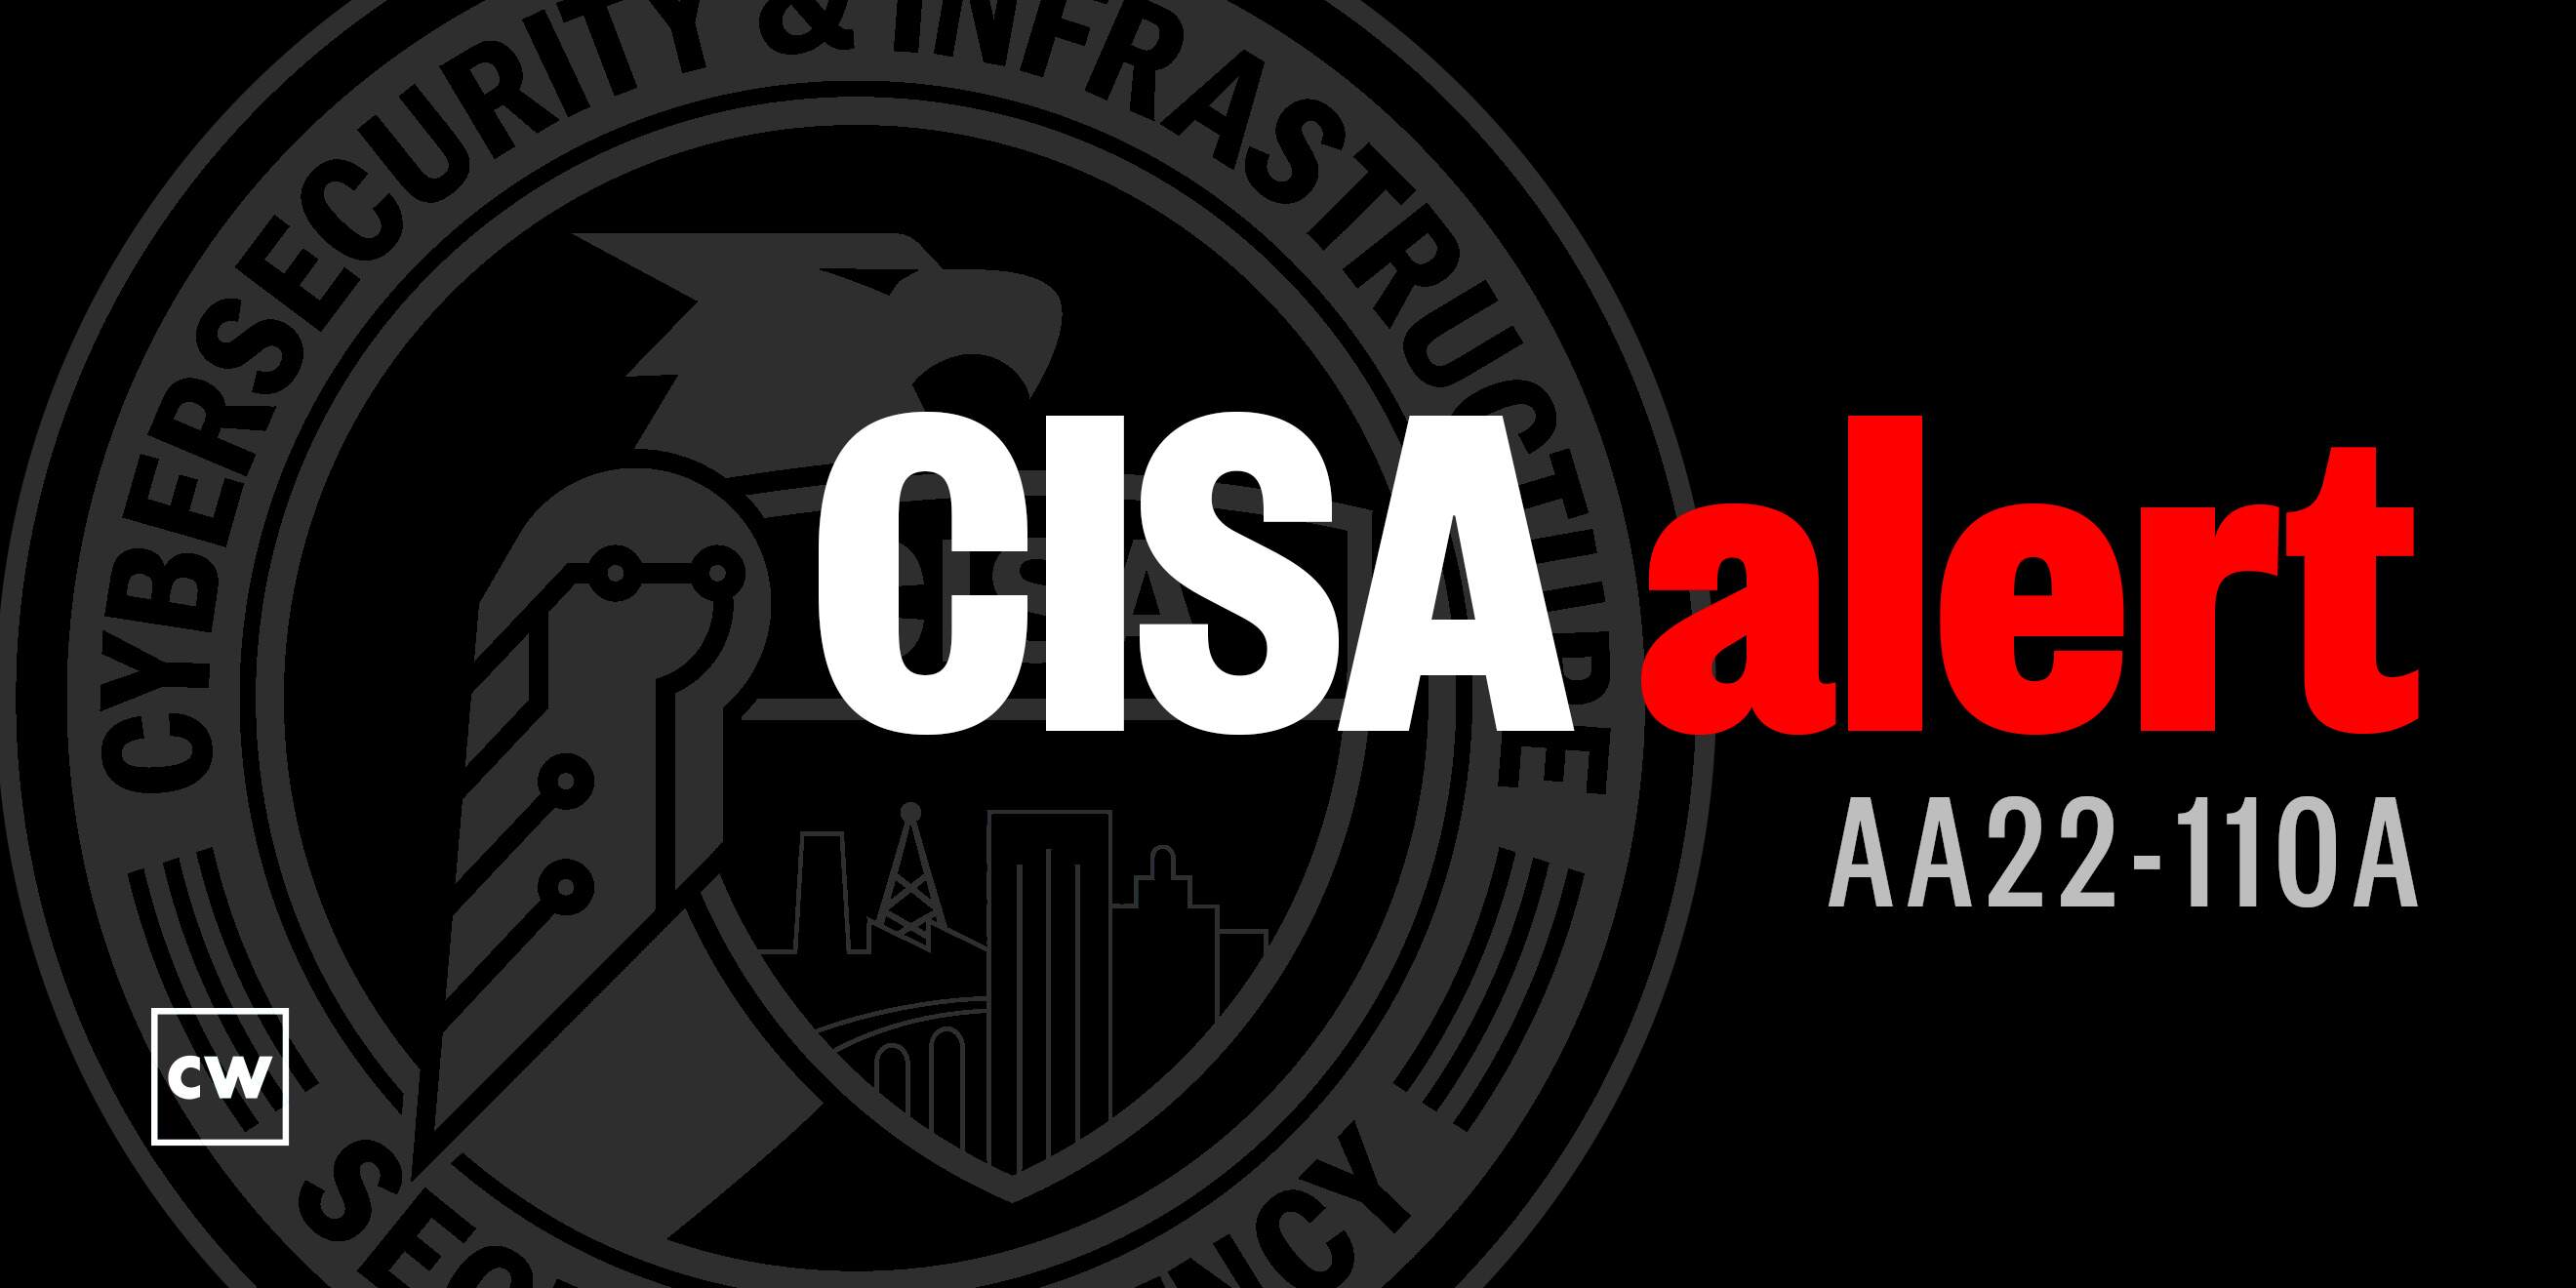 CISA Cybersecurity Alerts 4.20.22